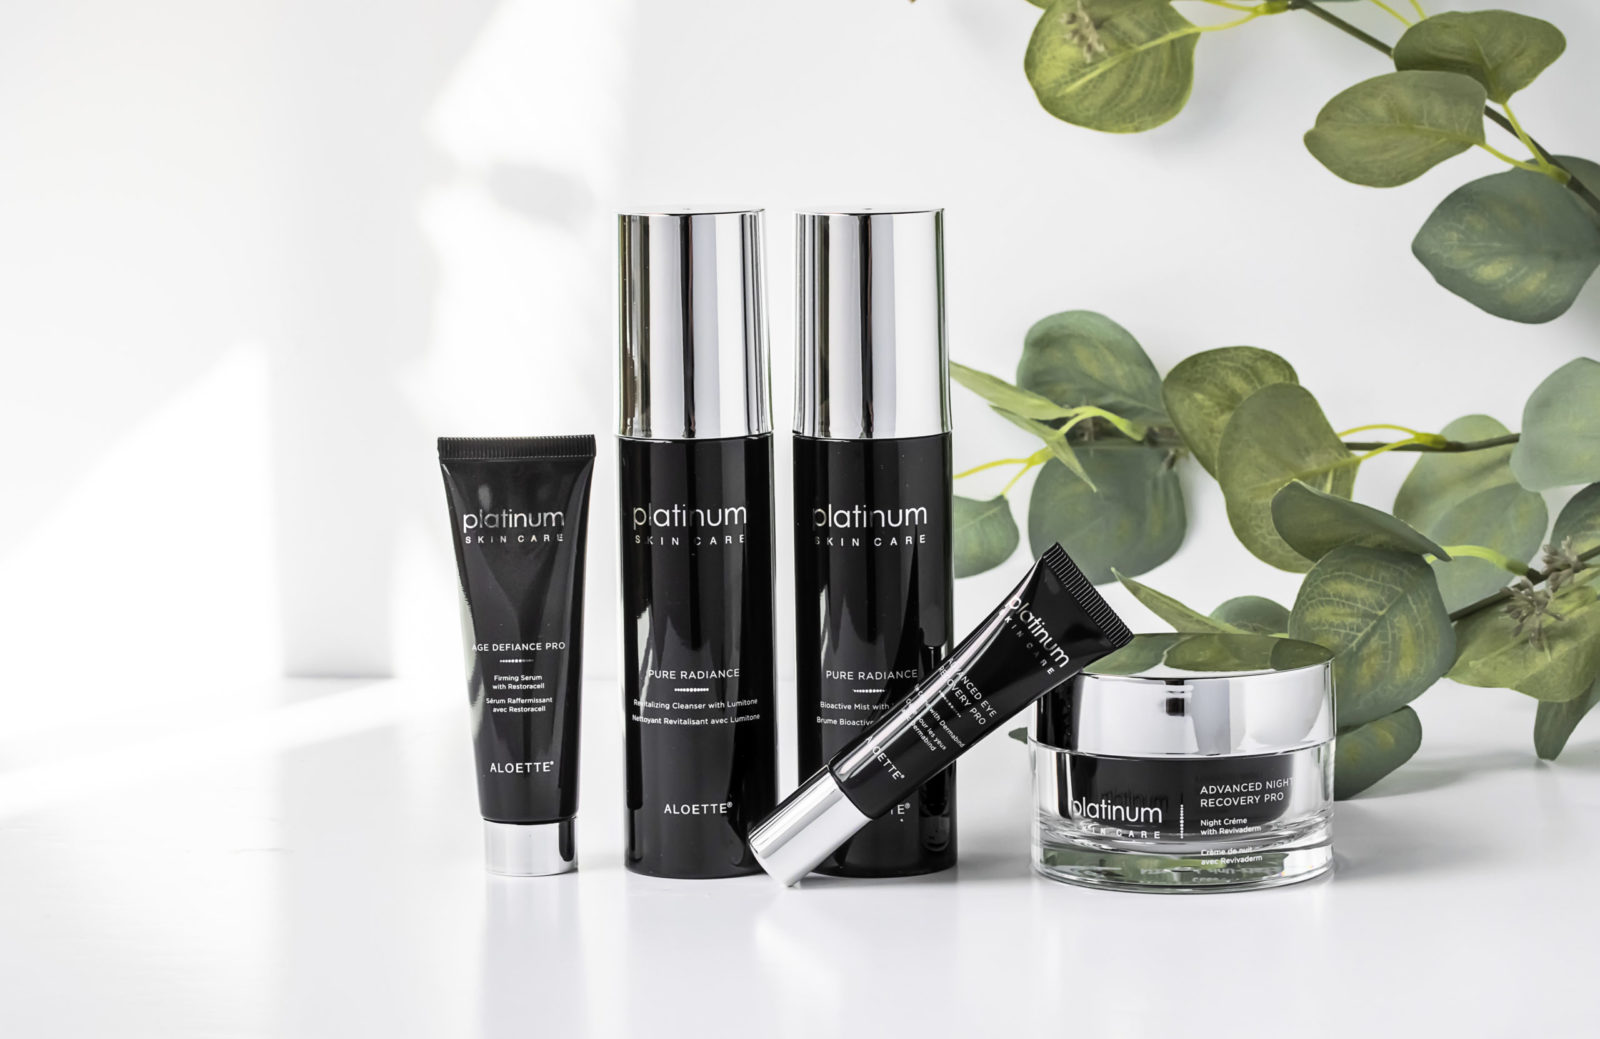 Age Defiance Pro + Advance Night + AdV Eye Rec + Pure Radiance Cleanser and Mist + with Plant